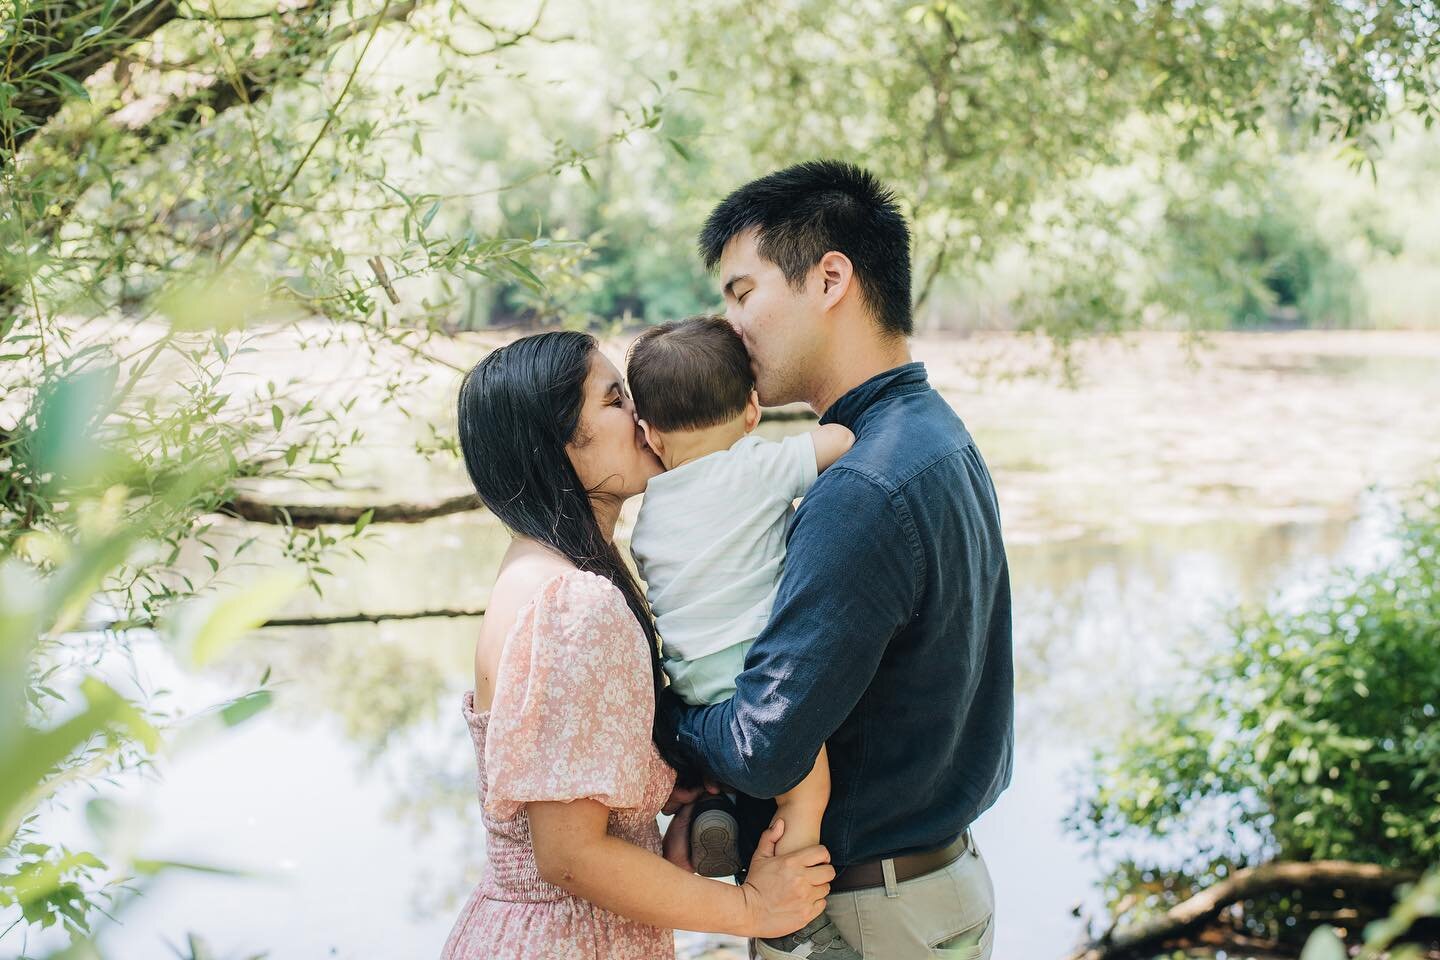 Josiah couldn&rsquo;t stand the heat so we turned him around and had mom and dad give him smooches instead 💖😘

Note to self: follow Michelle and Jonathan and bring a portable fan with you everywhere 

#chicago #chicagophotographer